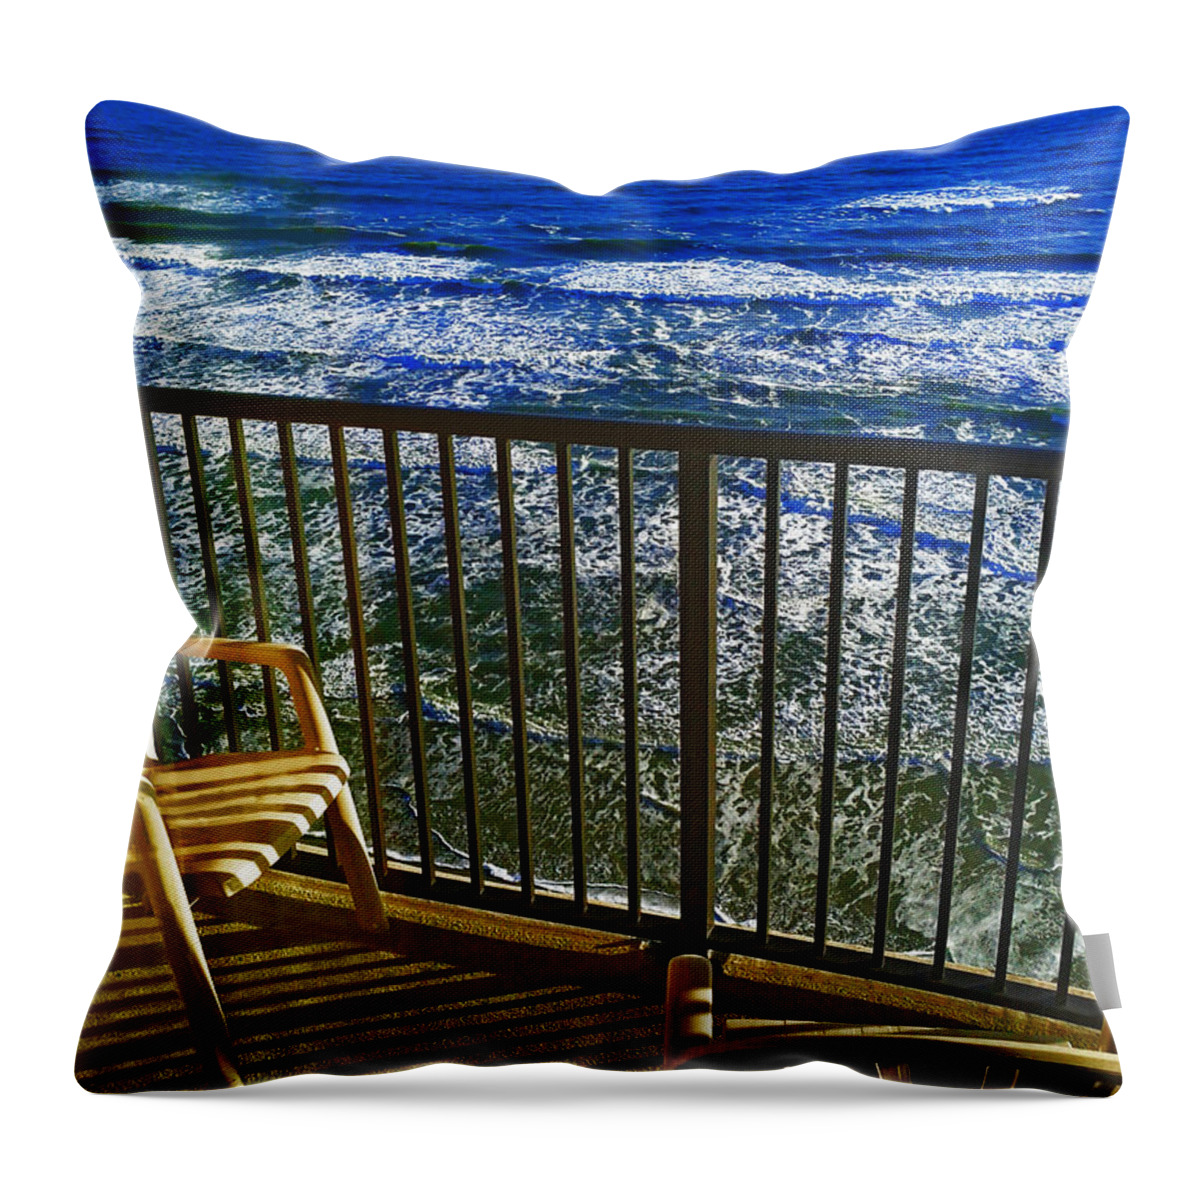 Seascape Throw Pillow featuring the digital art Oceanside Seating by CHAZ Daugherty